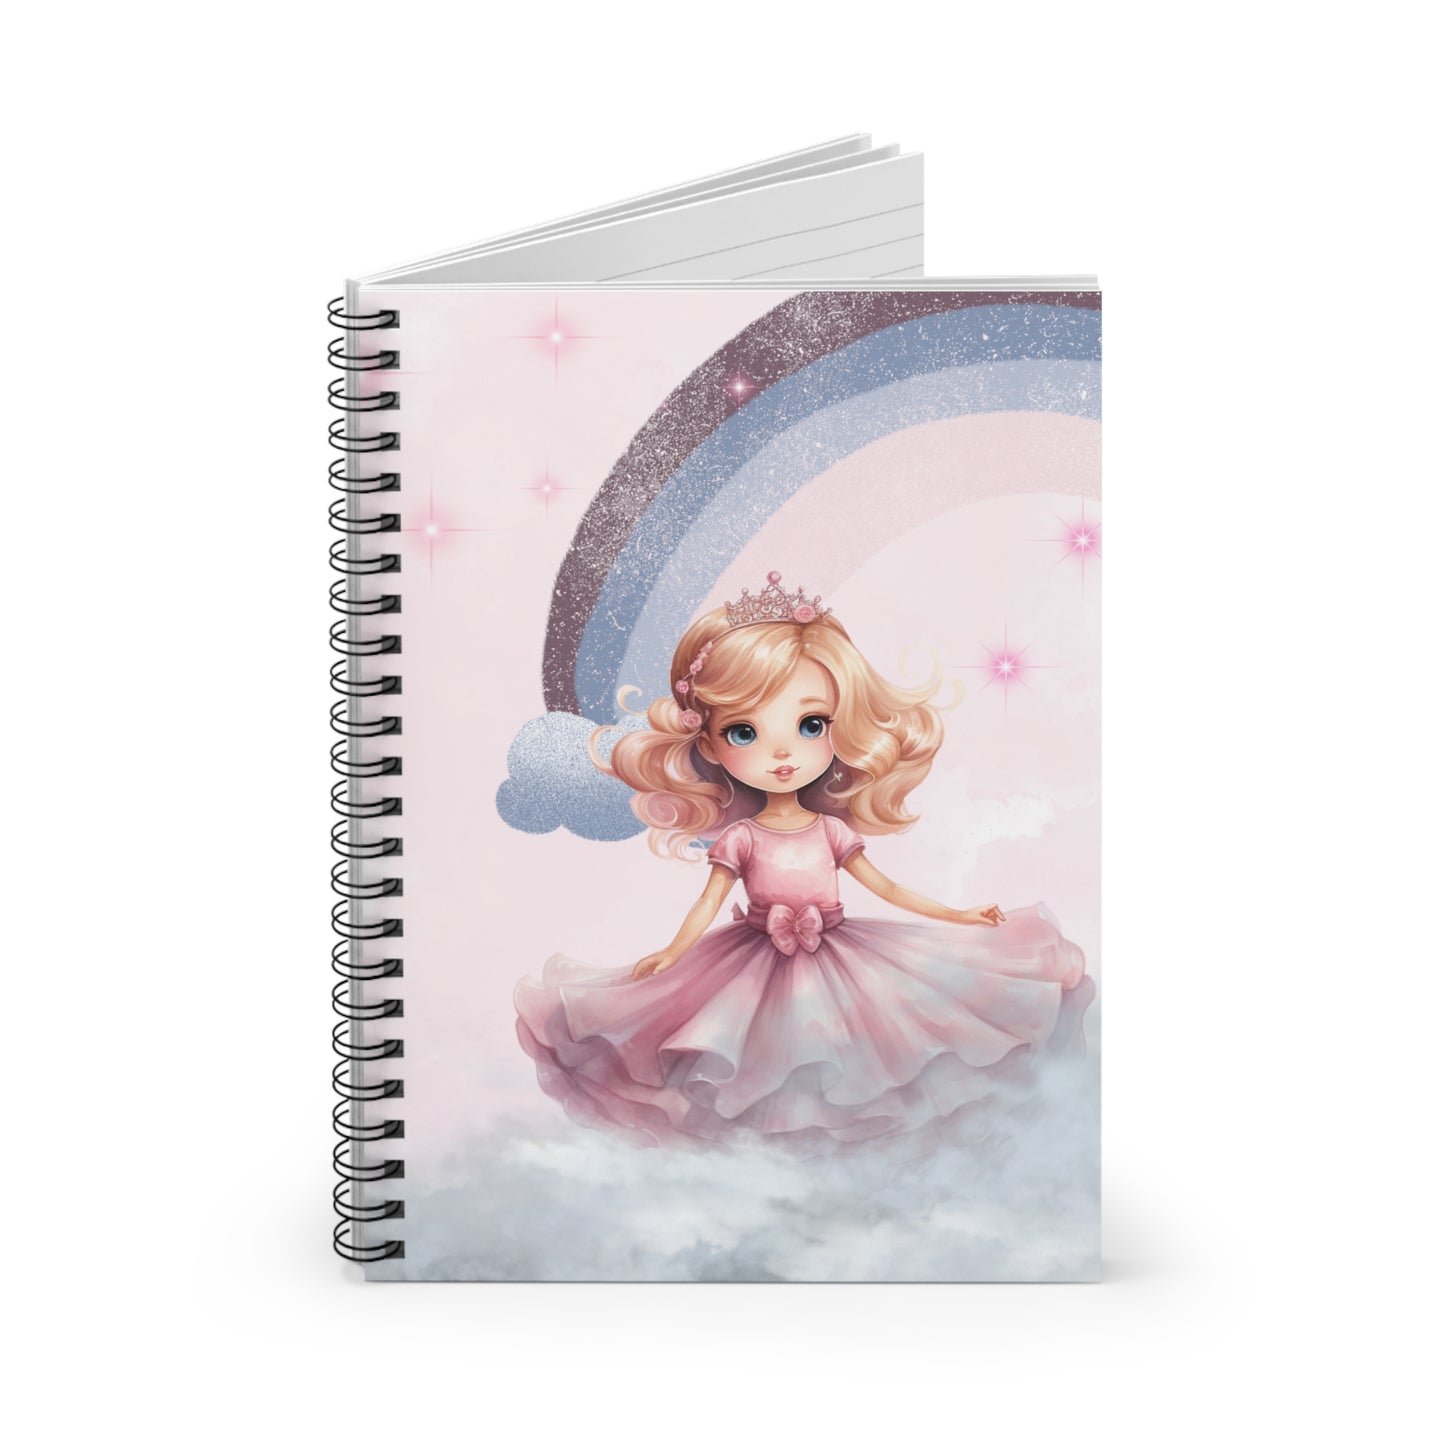 Silver Lining: Spiral Notebook - Log Books - Journals - Diaries - and More Custom Printed by TheGlassyLass